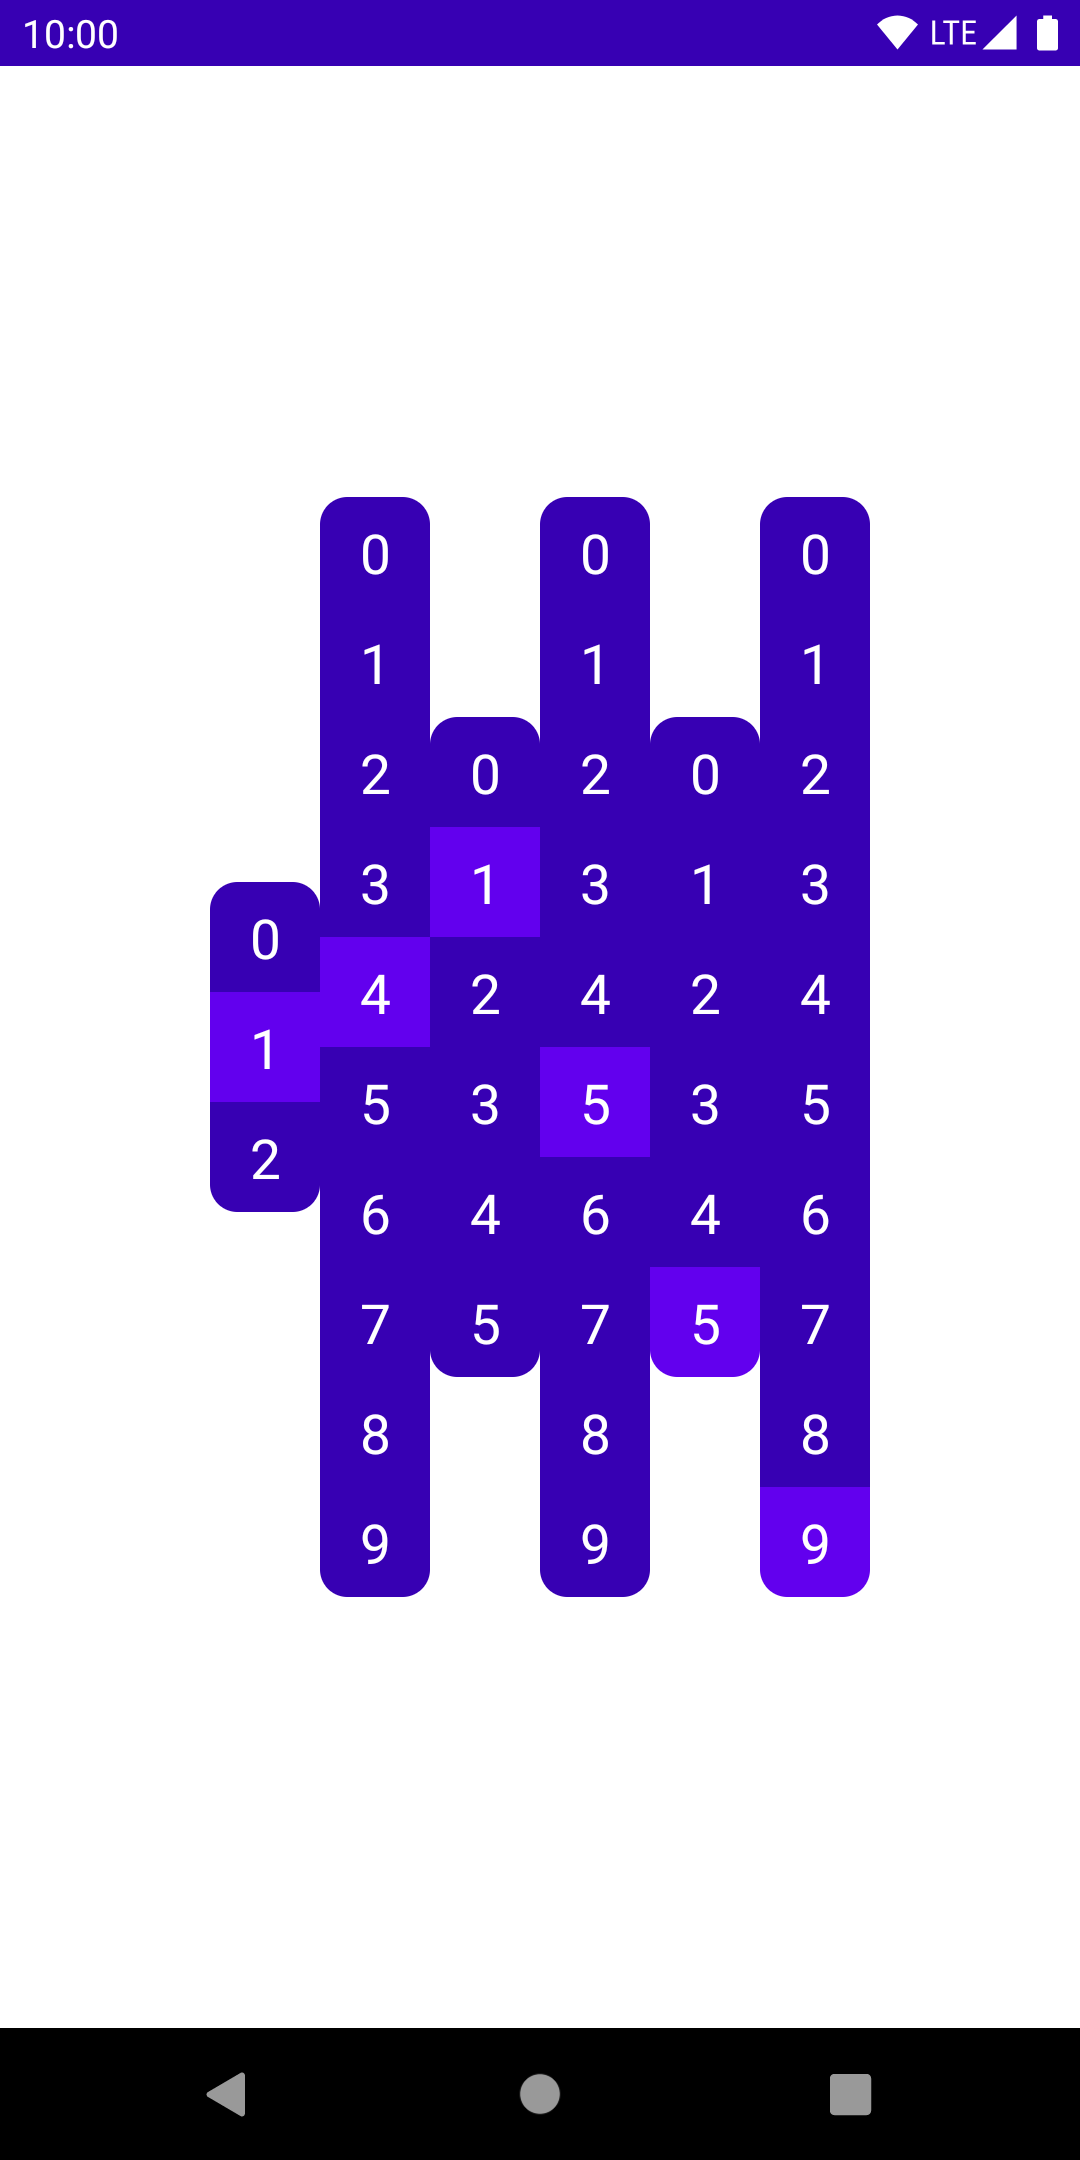 Multiple columns of digits, showing the current time